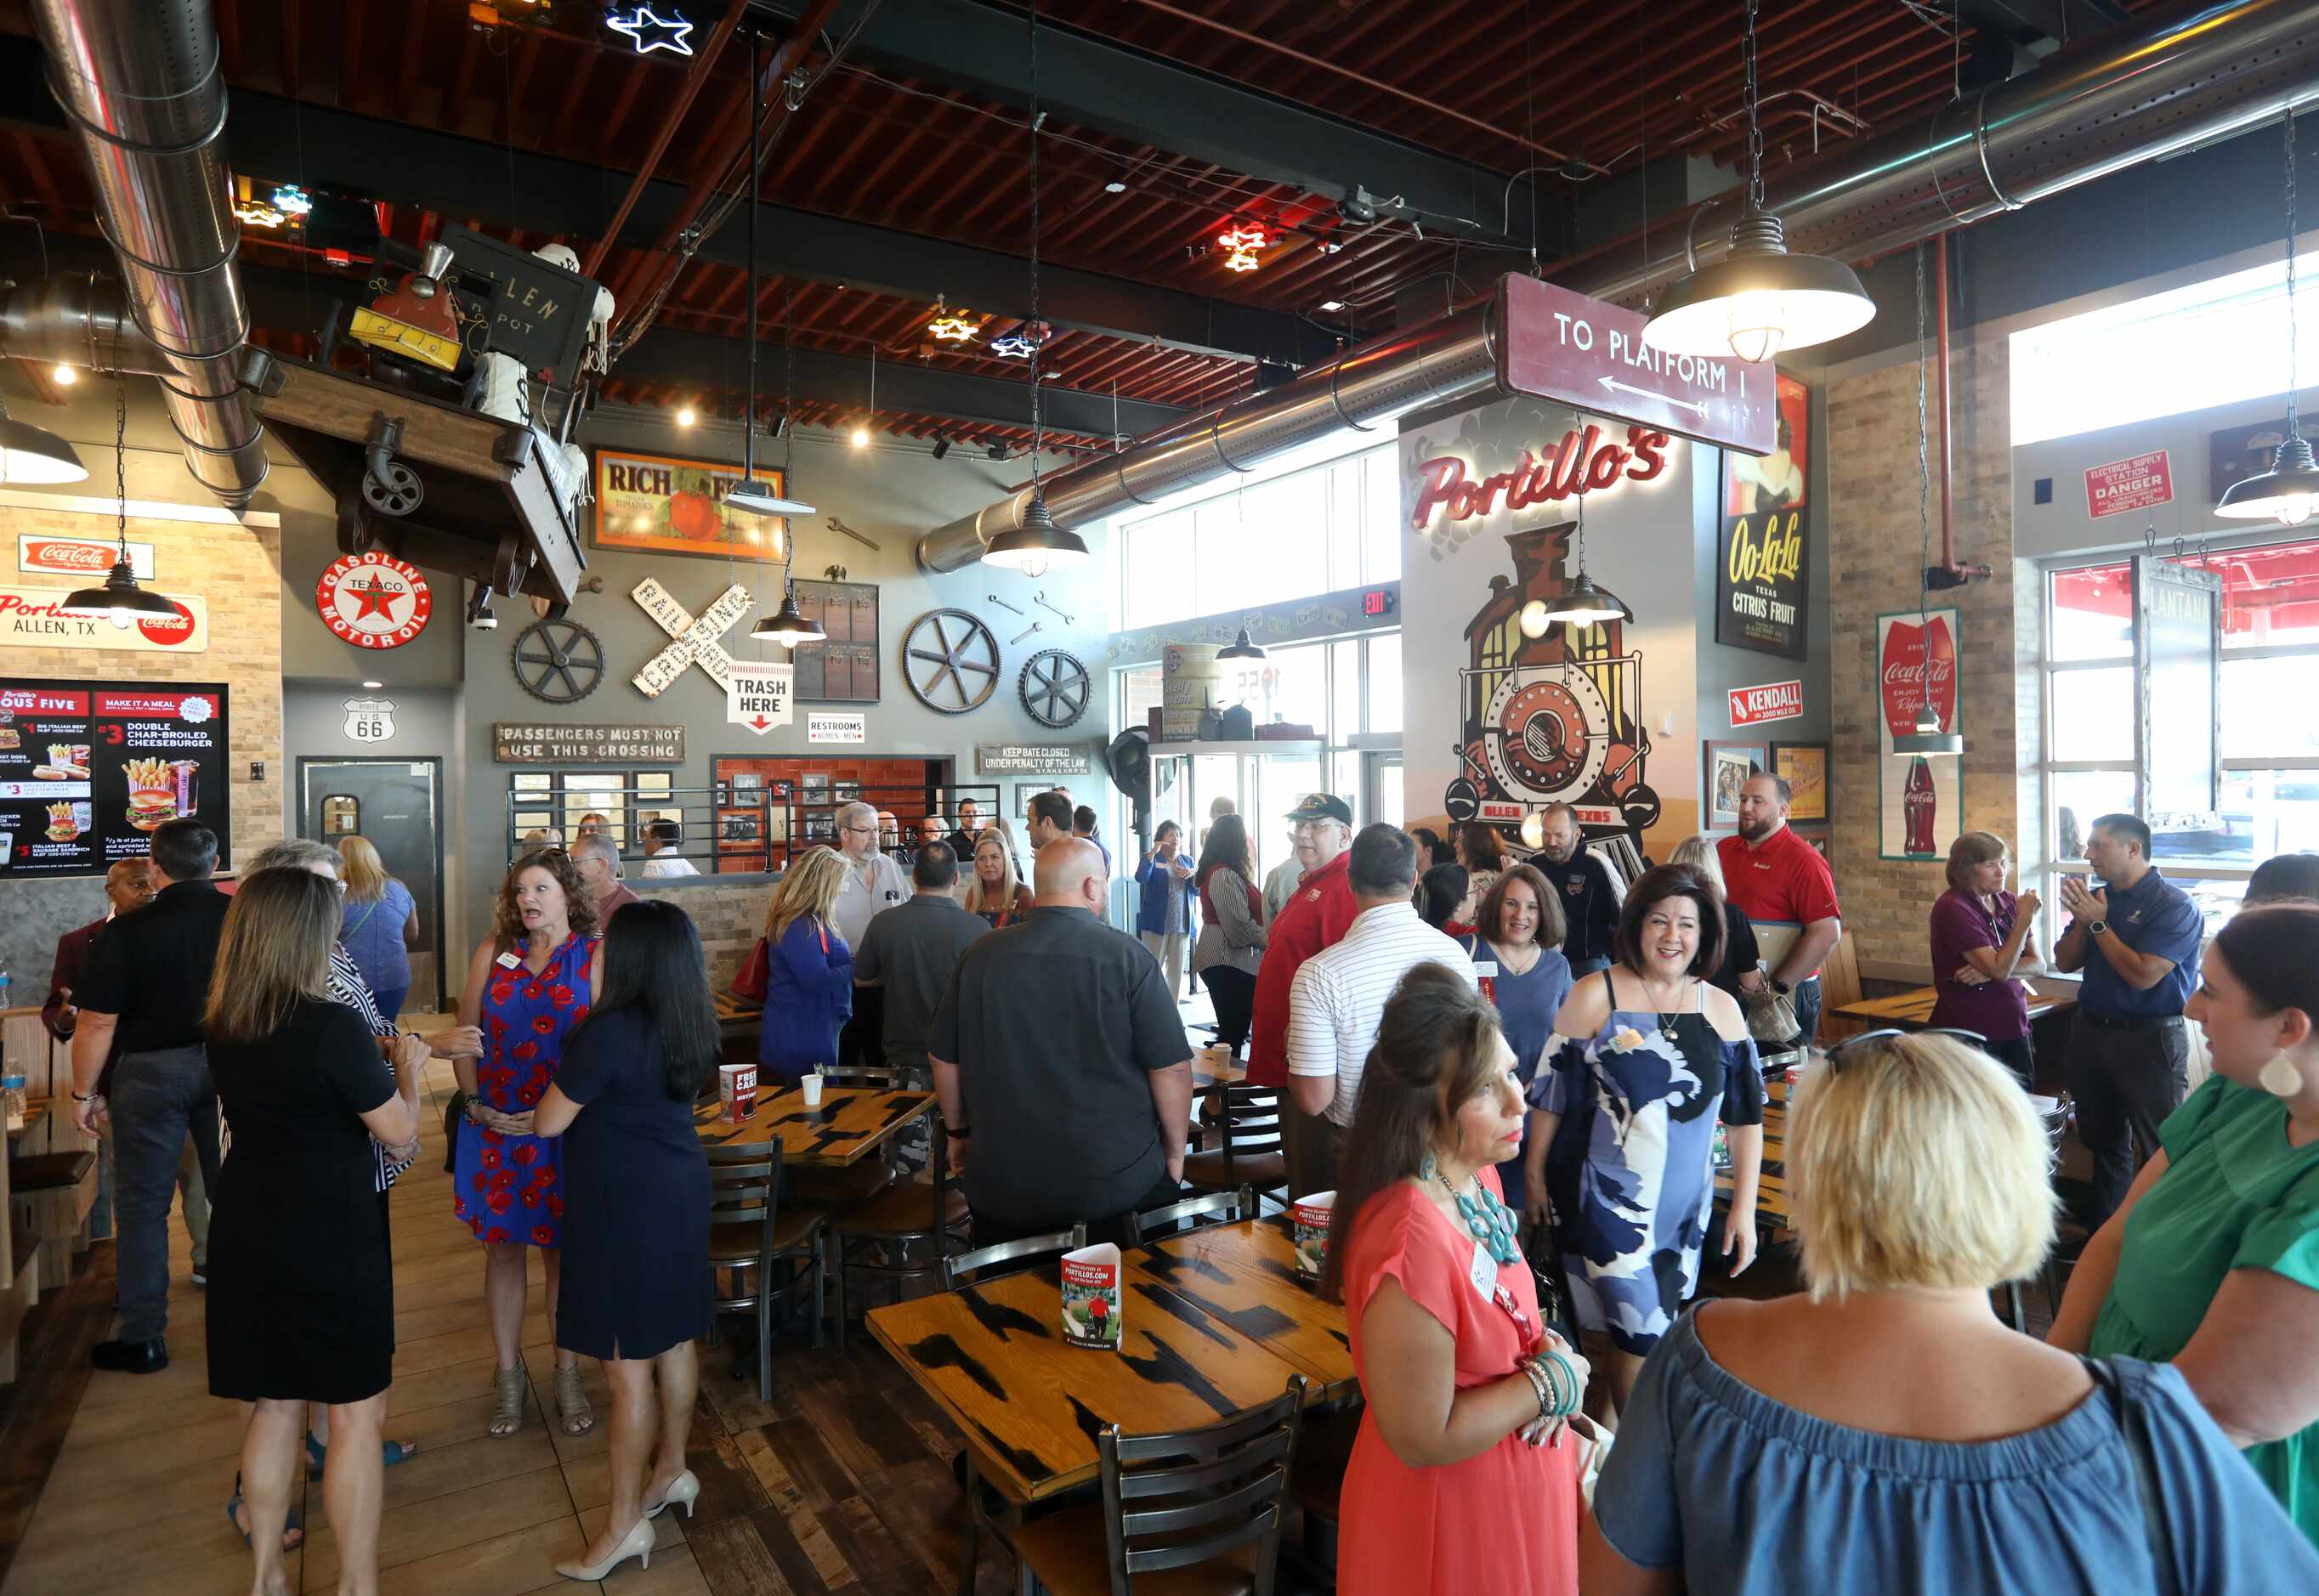 Guests mingle as they wait for the grand opening at Portillo's in Allen.